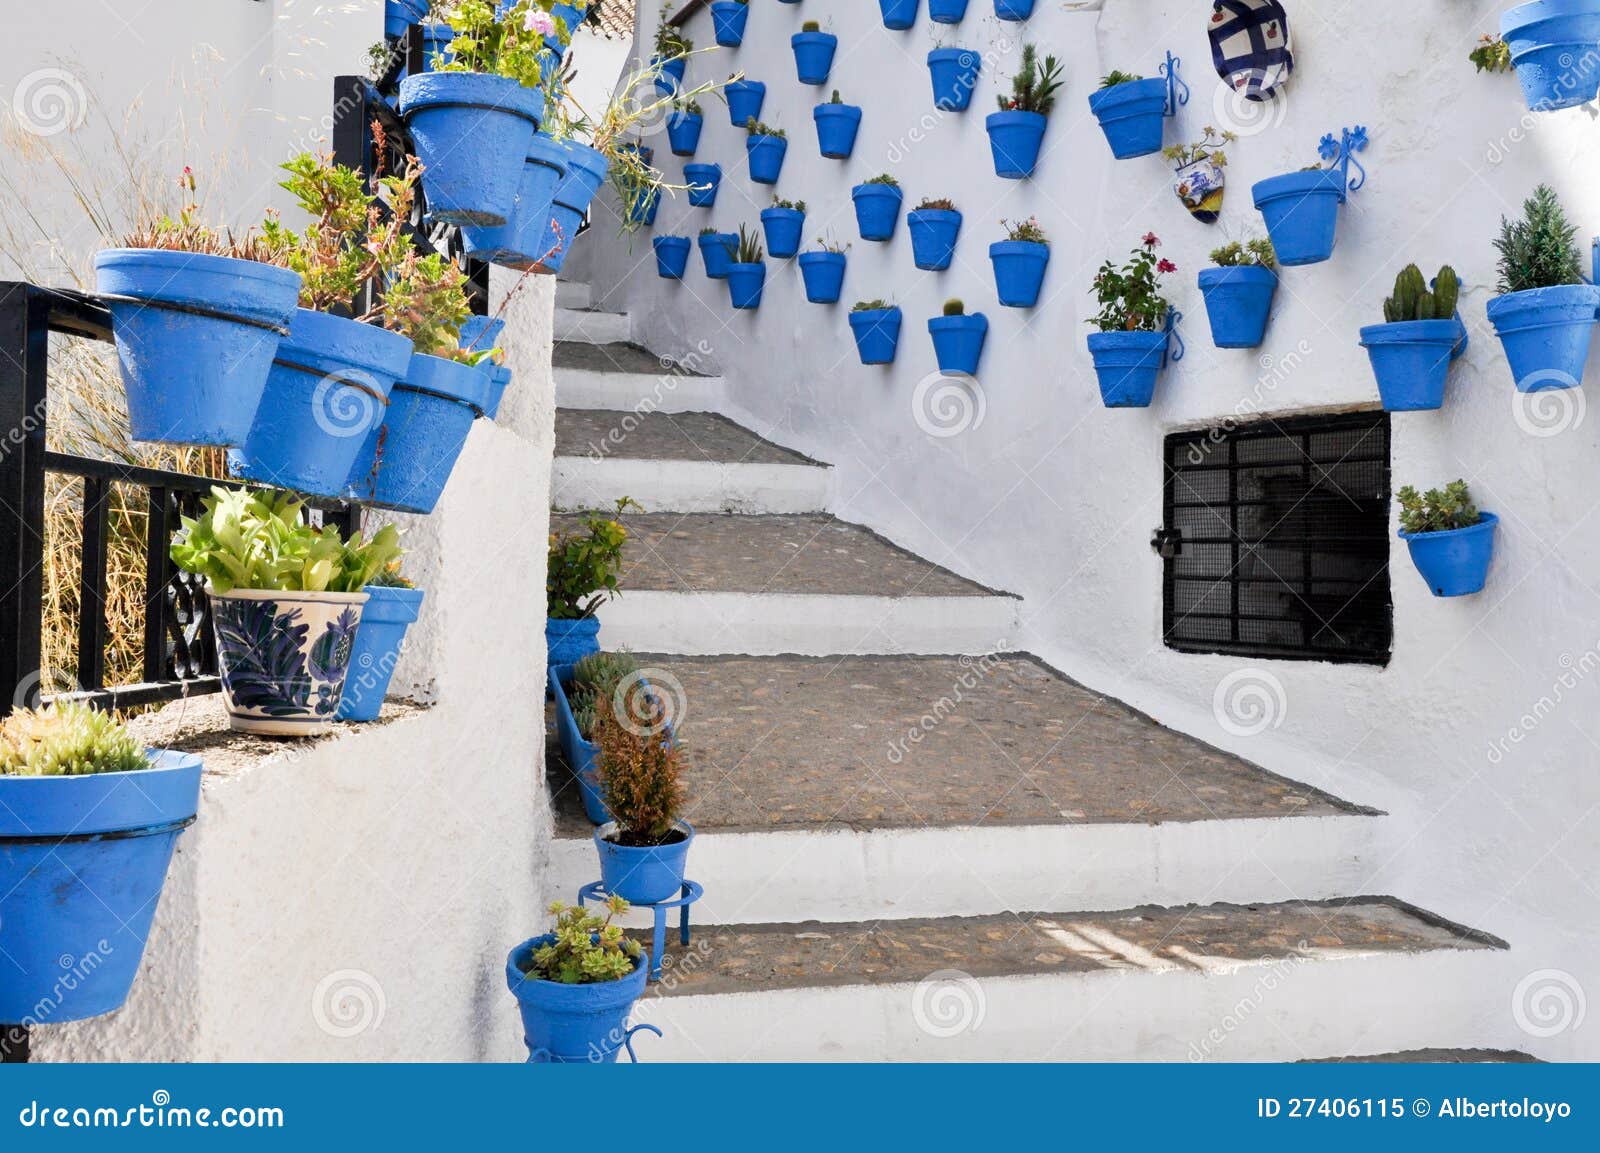 flowerpots in an andalusian town